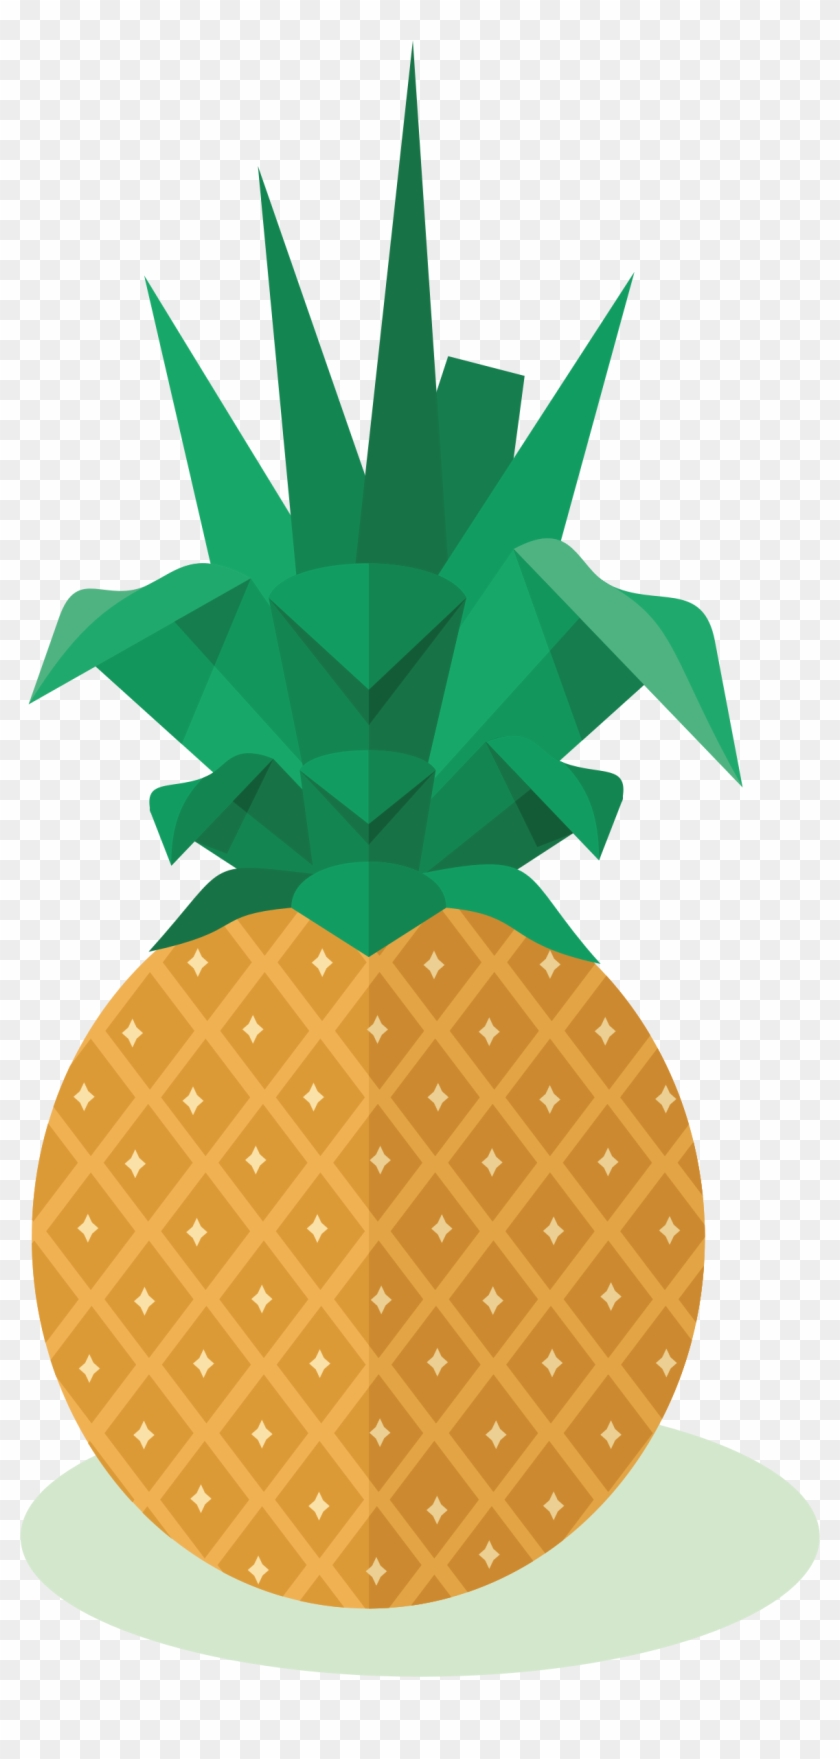 Fecial Clipart Pineapple 1 Pineapple Fruit Clipart - Cartoon Pineapple Draw - Png Download #641817